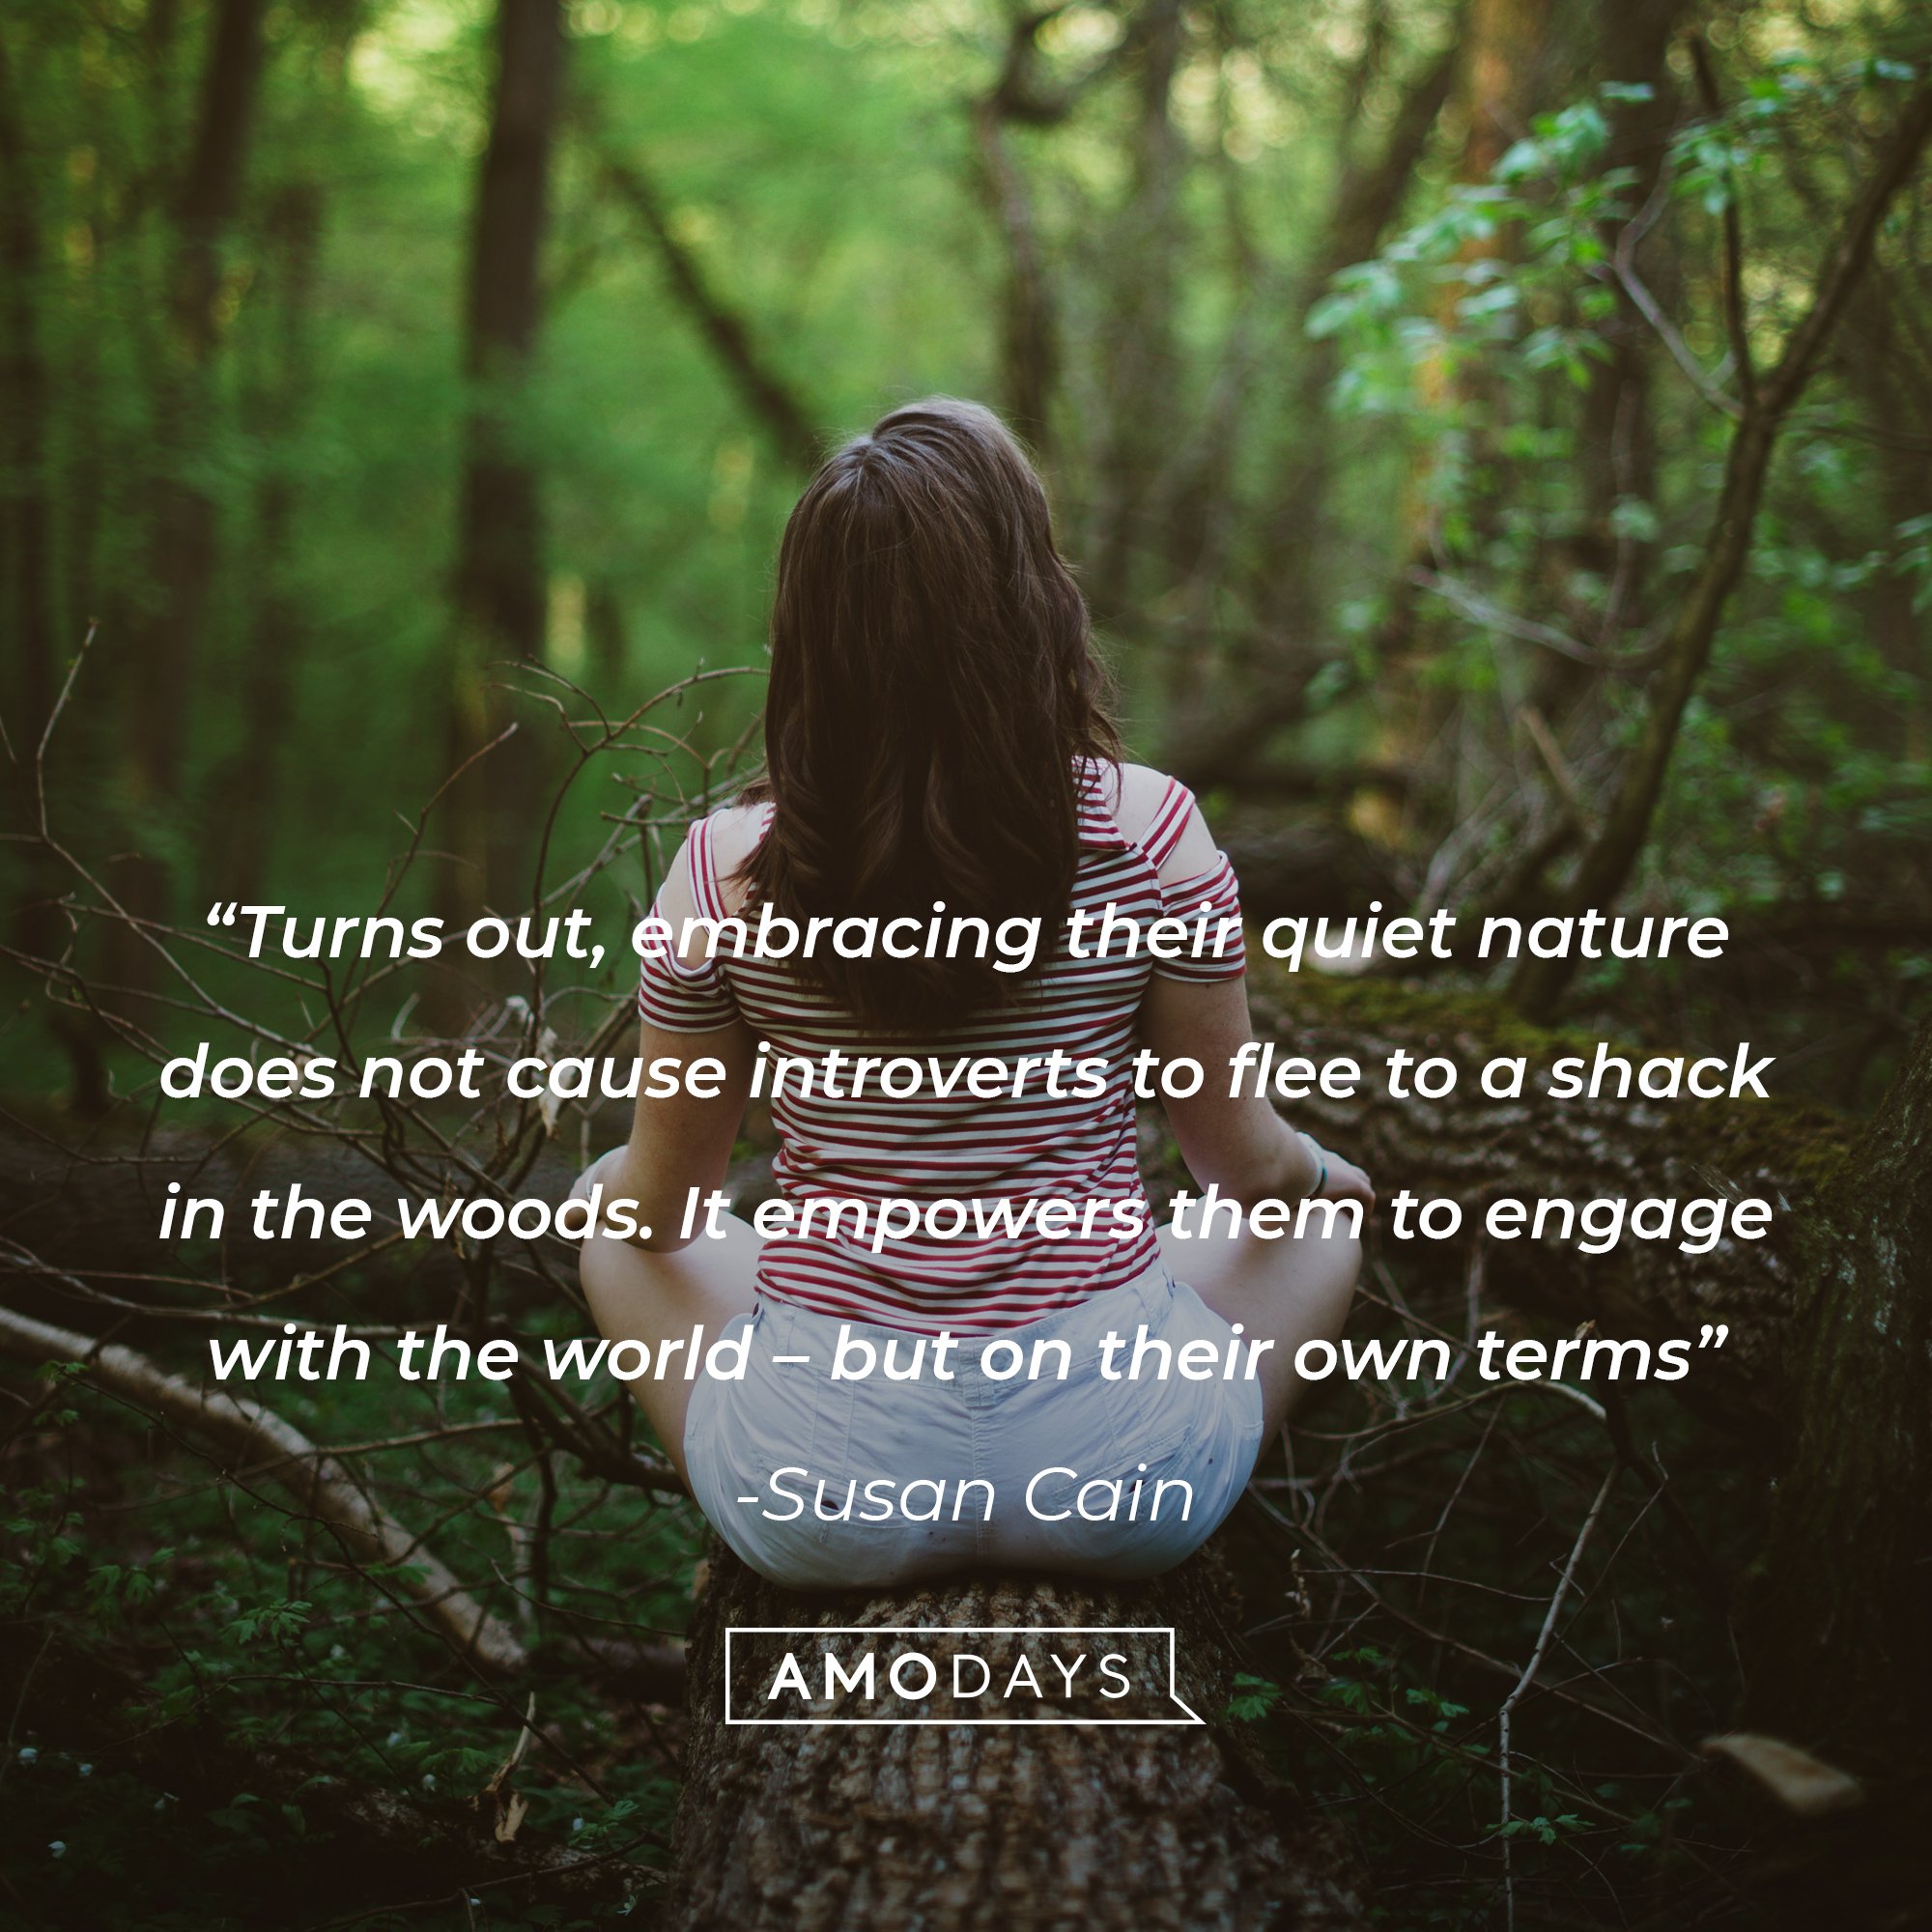 Sudan Cain's quote: "Turns out, embracing their quiet nature does not cause introverts to flee to a shack in the woods. It empowers them to engage with the world — but on their own terms." | Image: AmoDays 